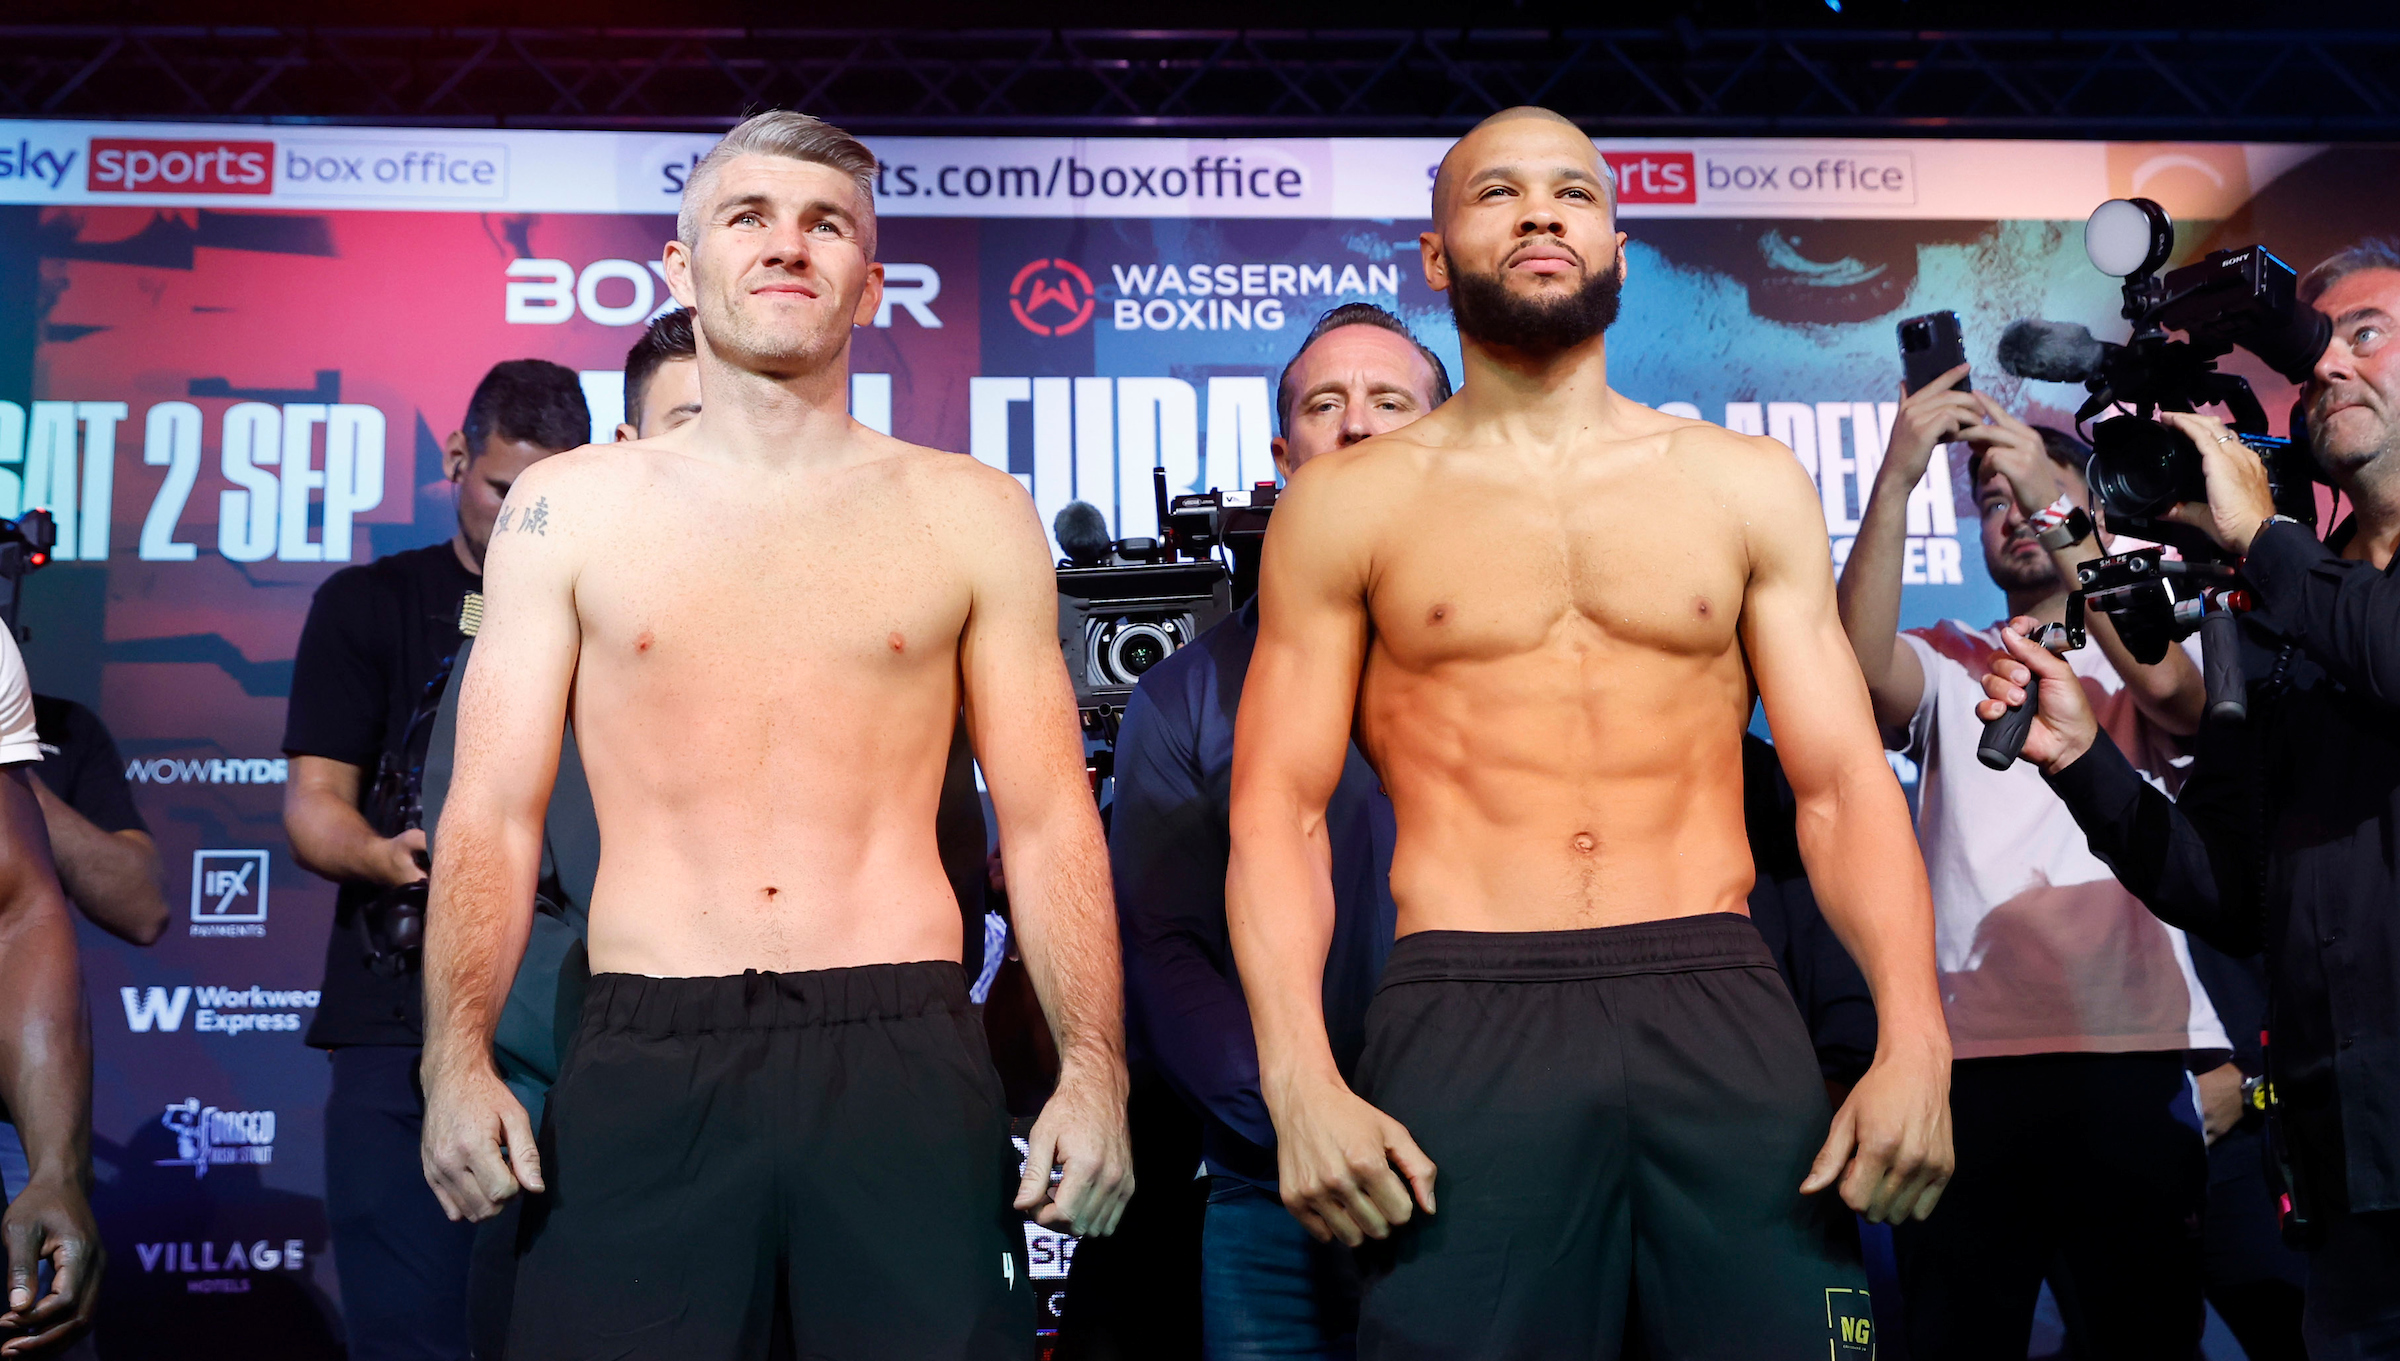 Smith vs. Eubank Jr. 2: Weigh-In Results & Betting Odds